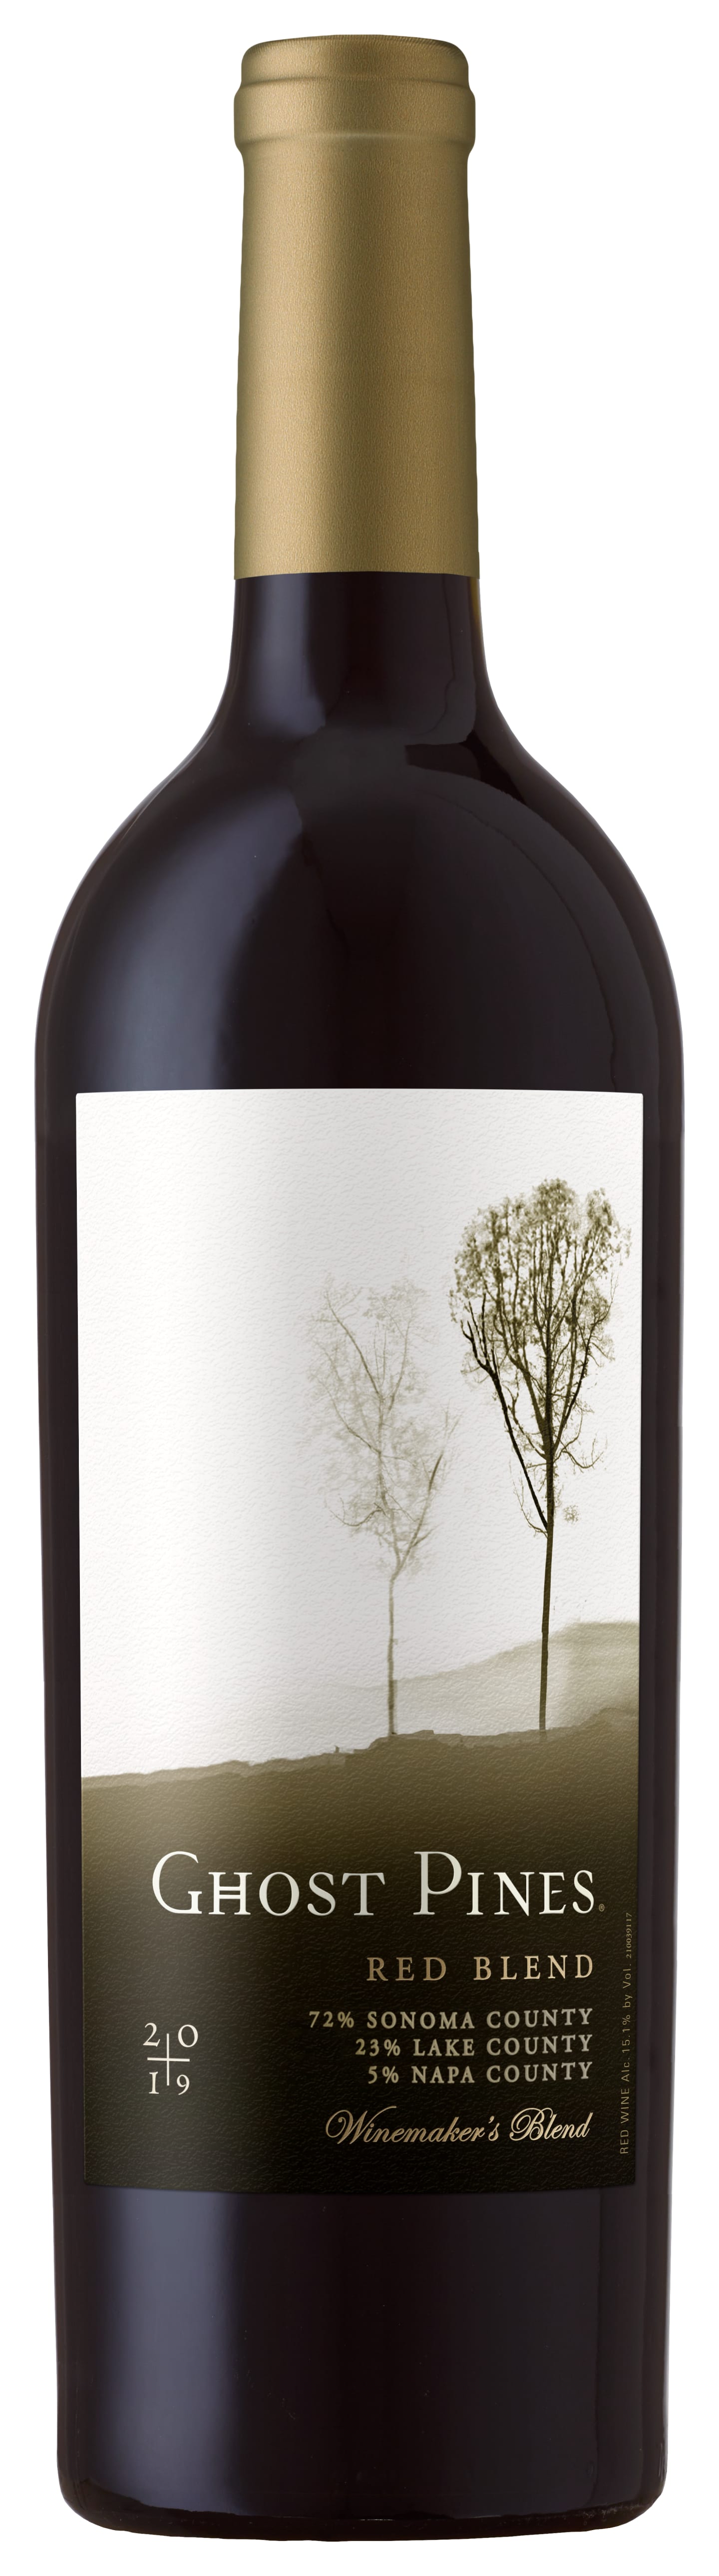 Ghost Pines Red Blend 2019